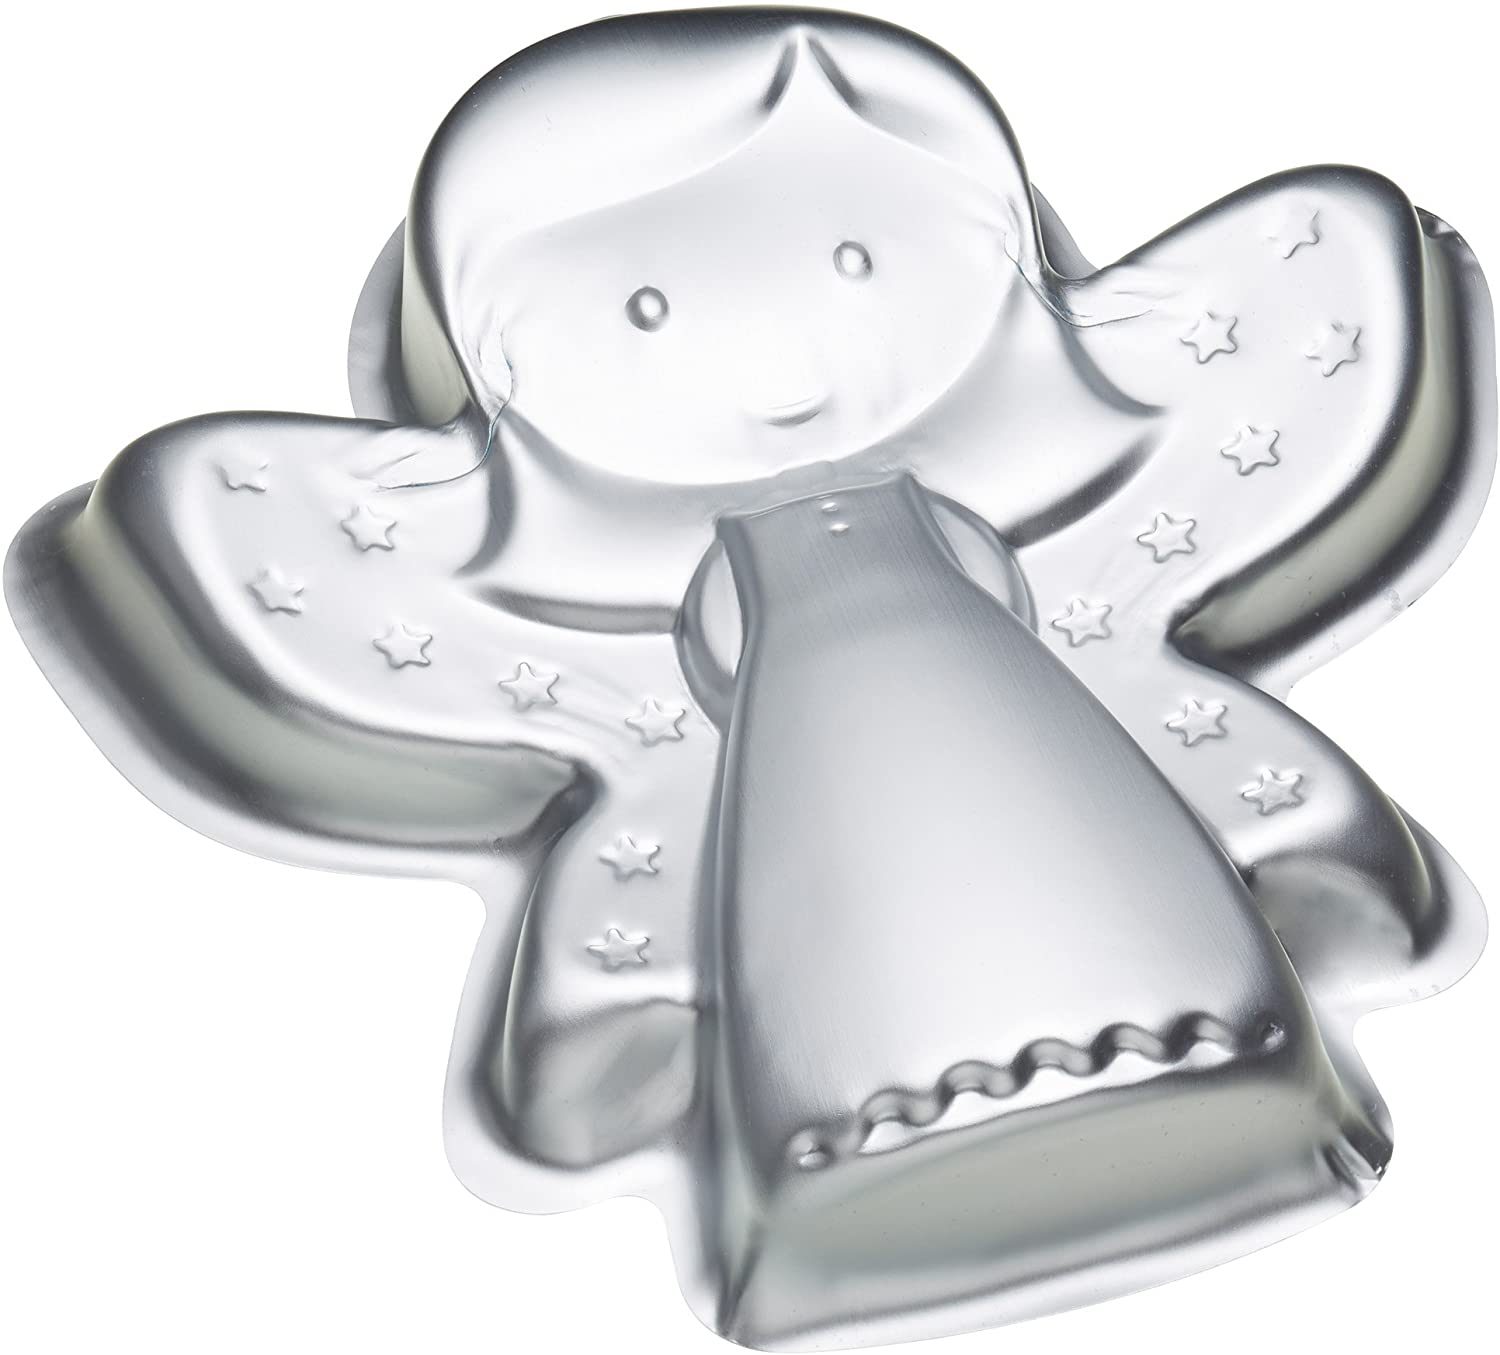 Kitchen Craft Fairy Shaped Cake Tin | Buy Online Here - Portmeirion Online